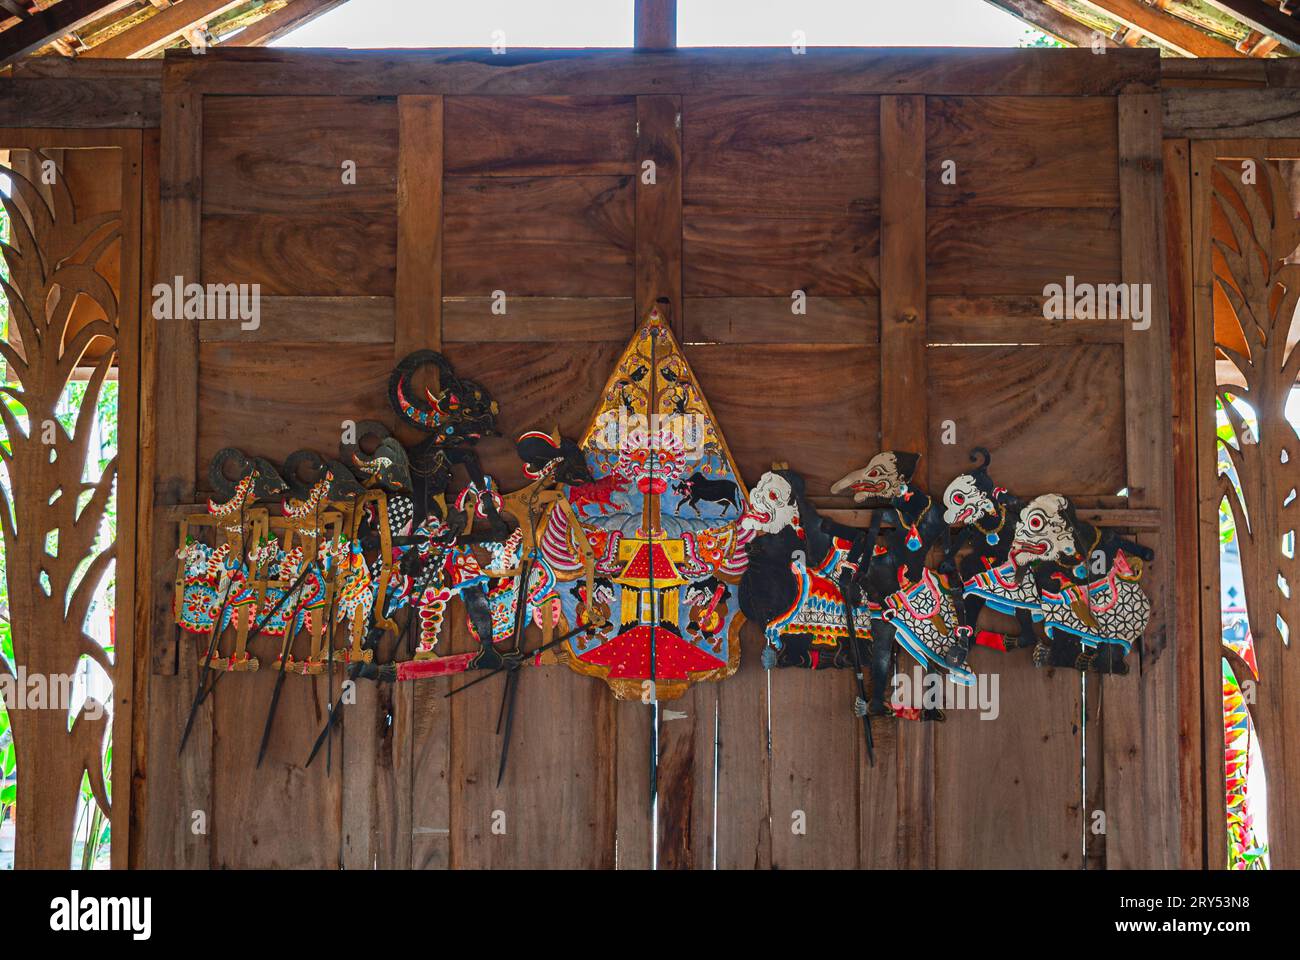 Wayang Kulit displayed on a wooden wall. Indonesian and Javanese traditional shadow puppets made of leather. Stock Photo